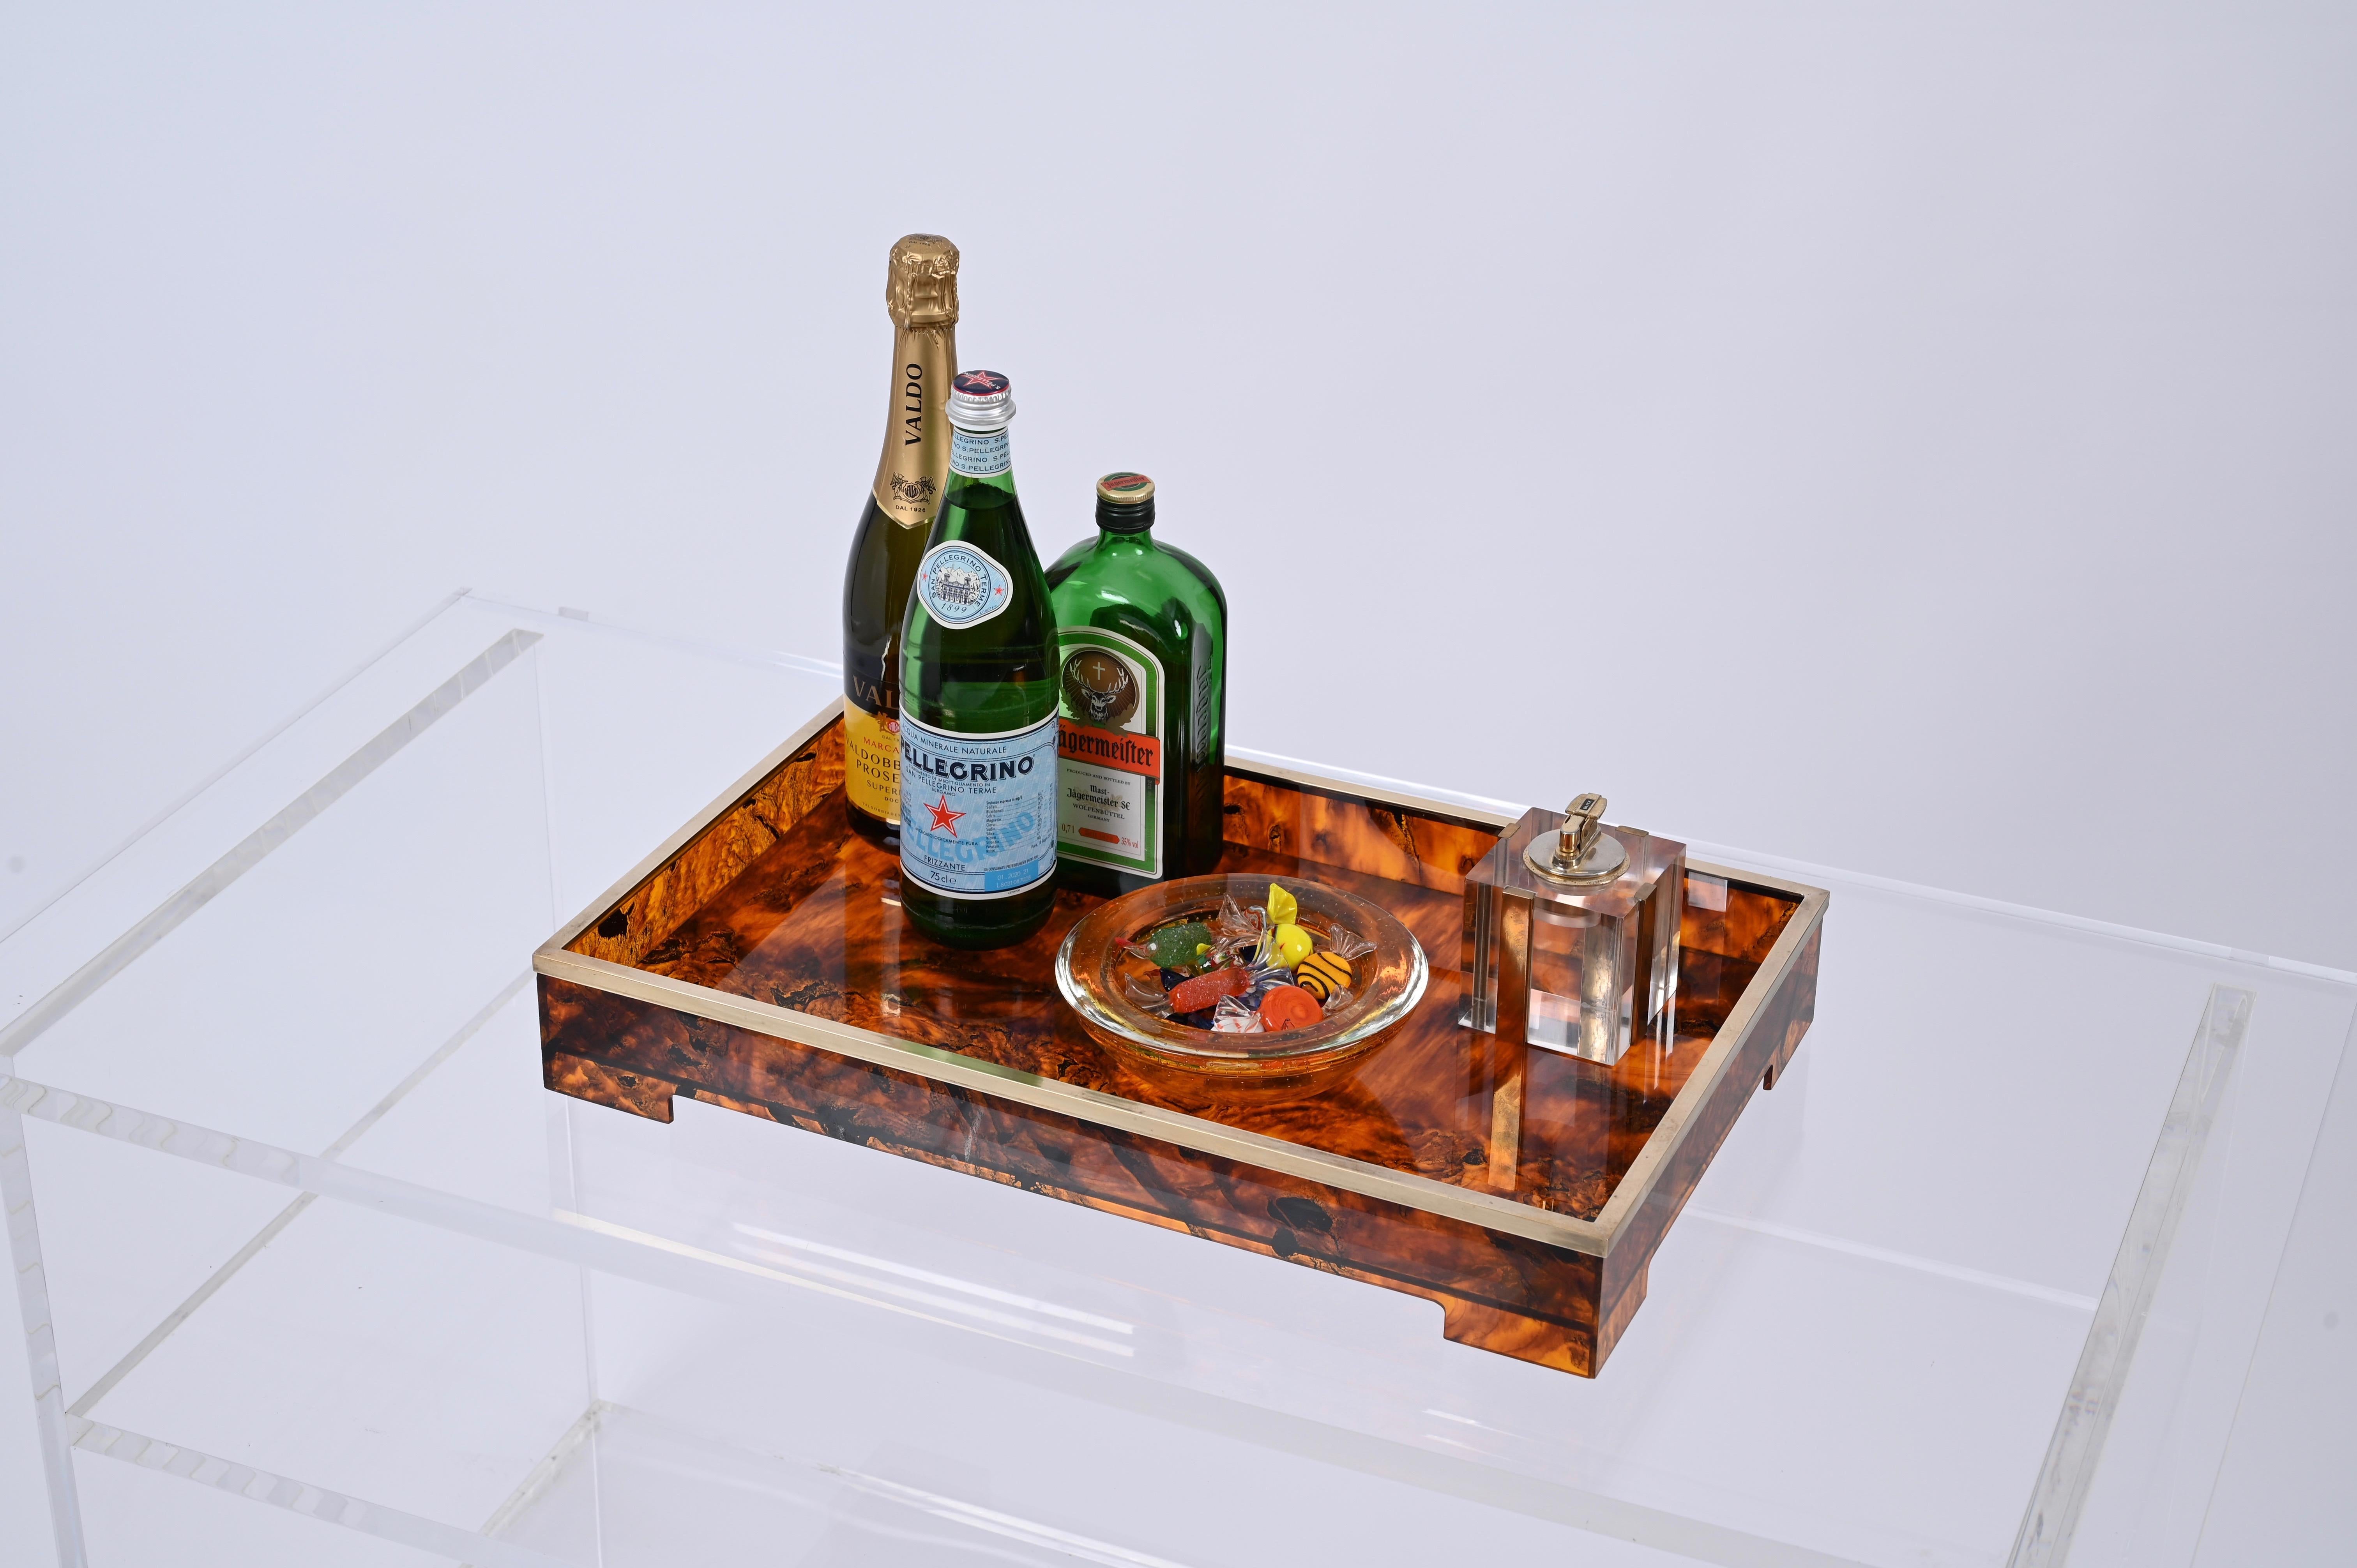 Astonishing large mid-century tray in tortoiseshell lucite and brass. This incredible piece was produced in Italy during the 1970s and its design is attributed to Willy Rizzo.

A real iconic tortoise and Lucite serving tray with the characteristics